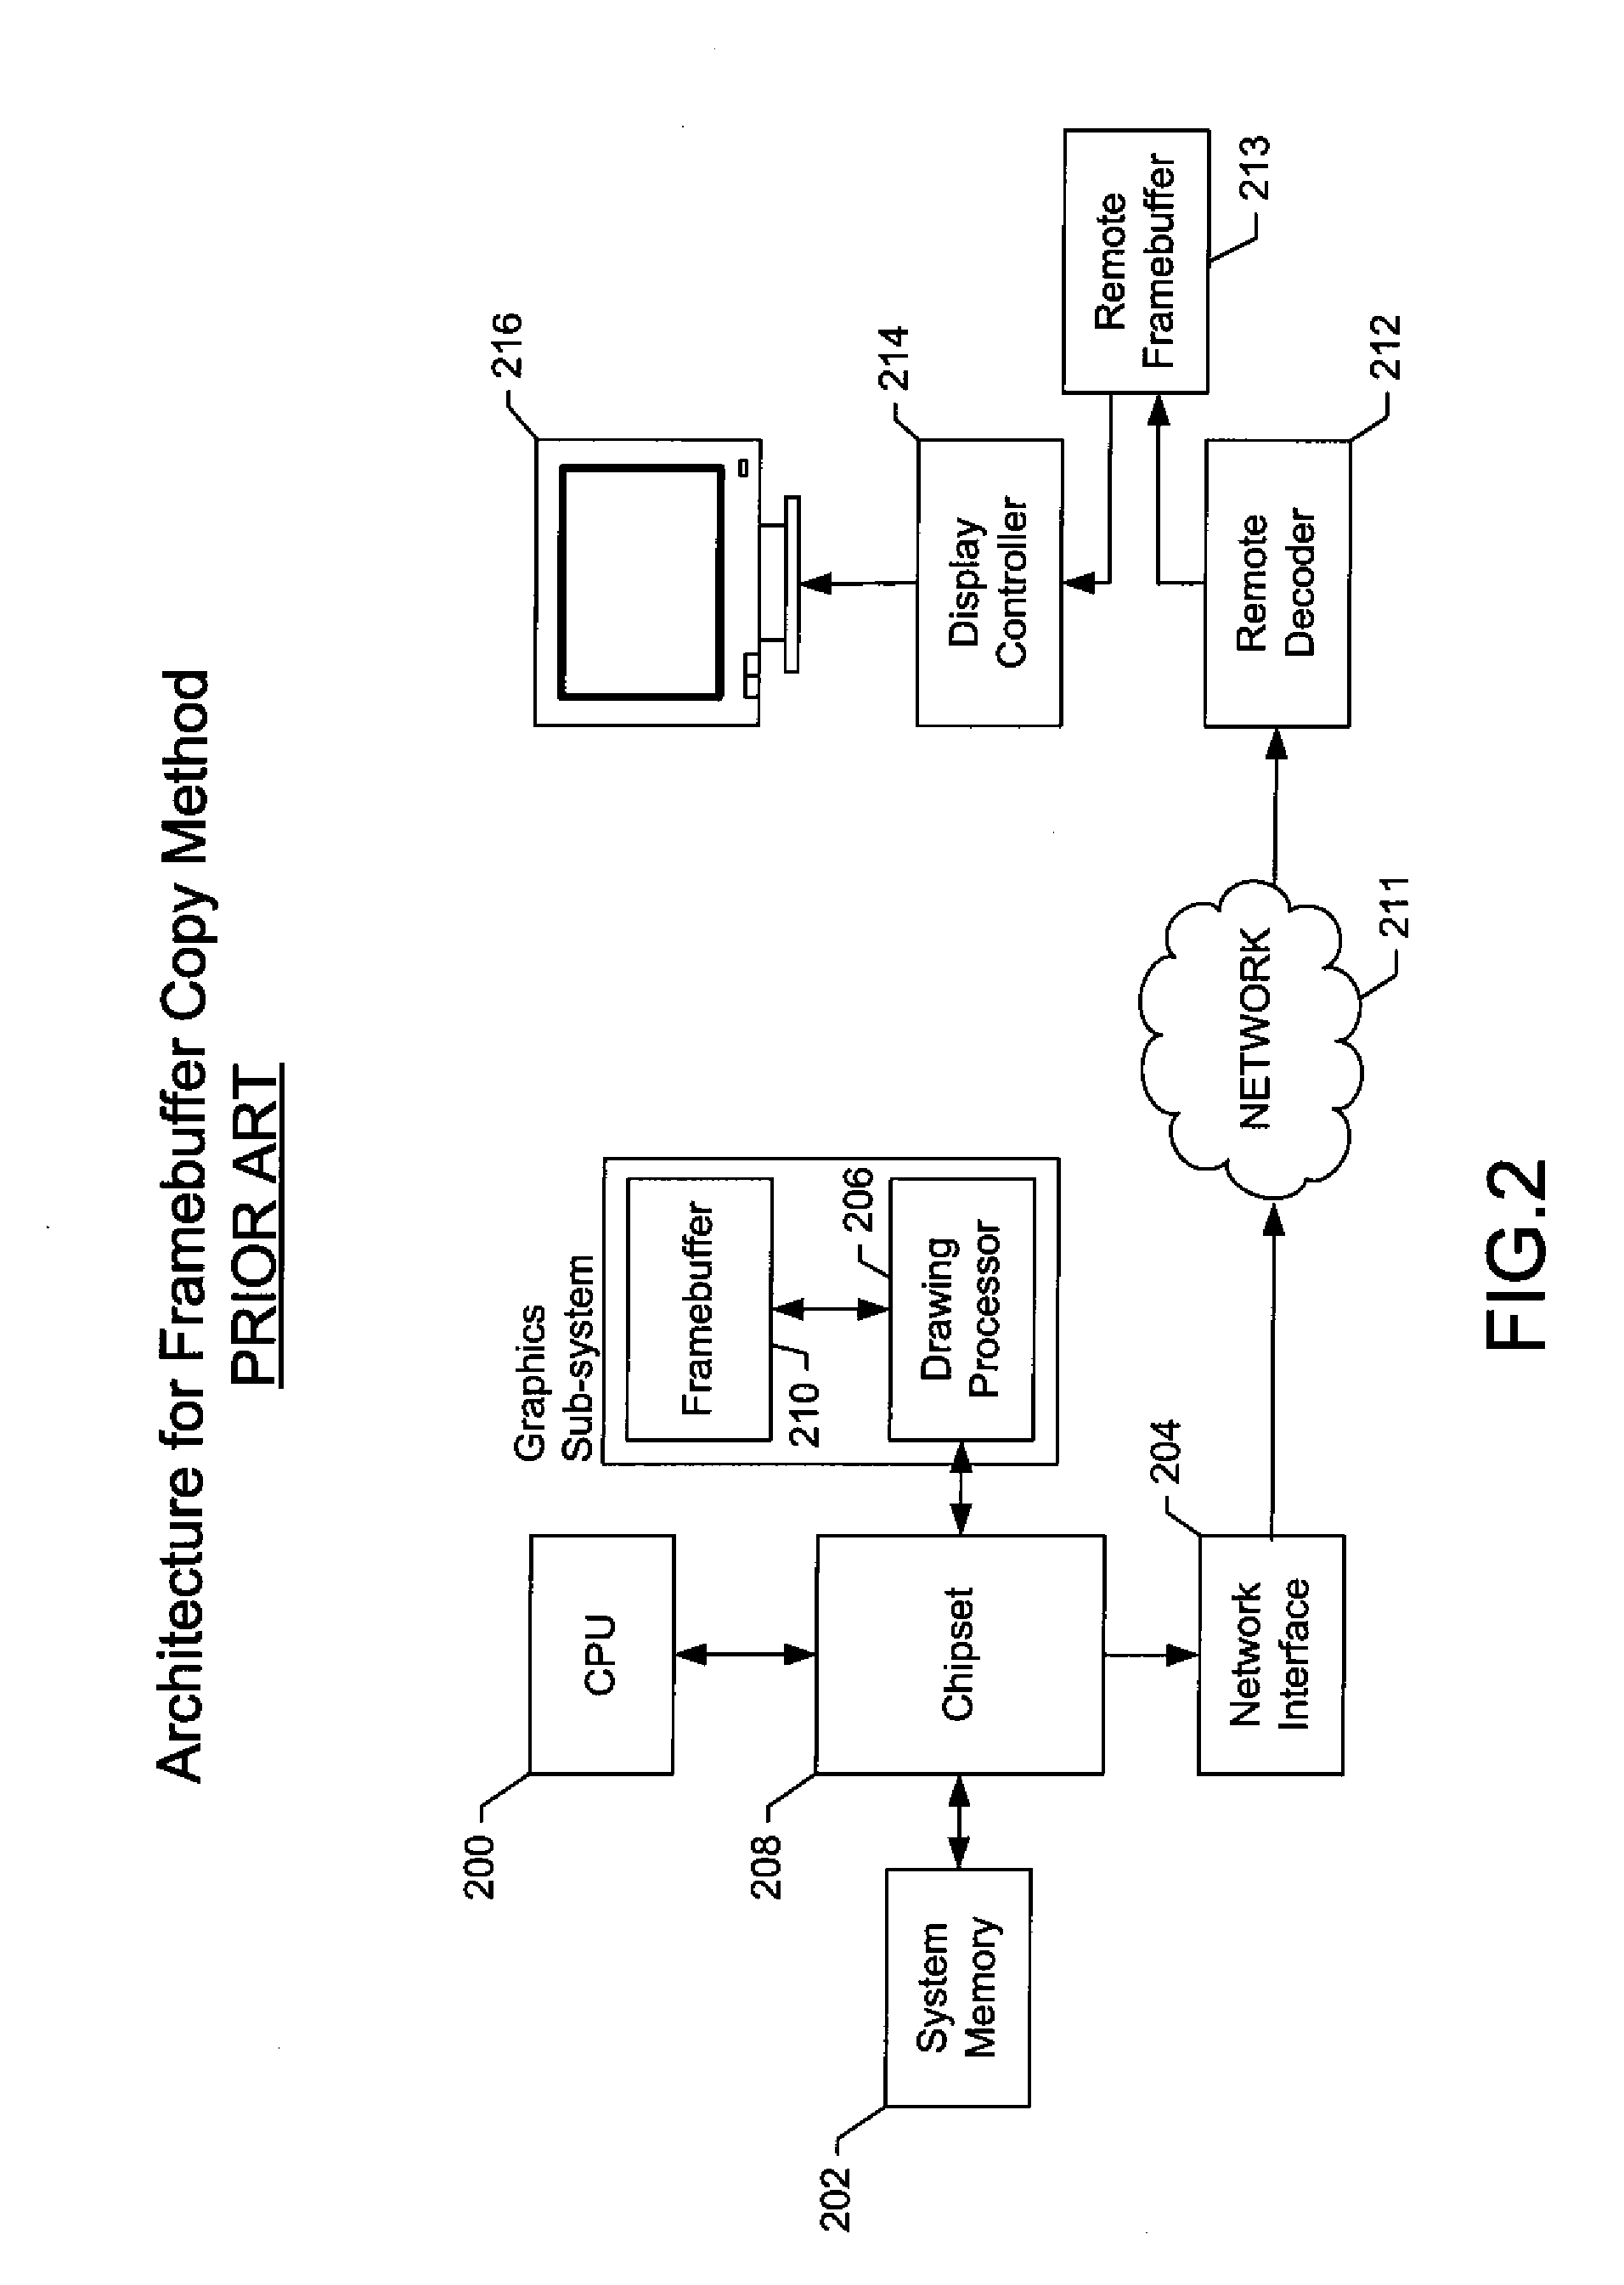 Methods and apparatus for interfacing a drawing memory with a remote display controller